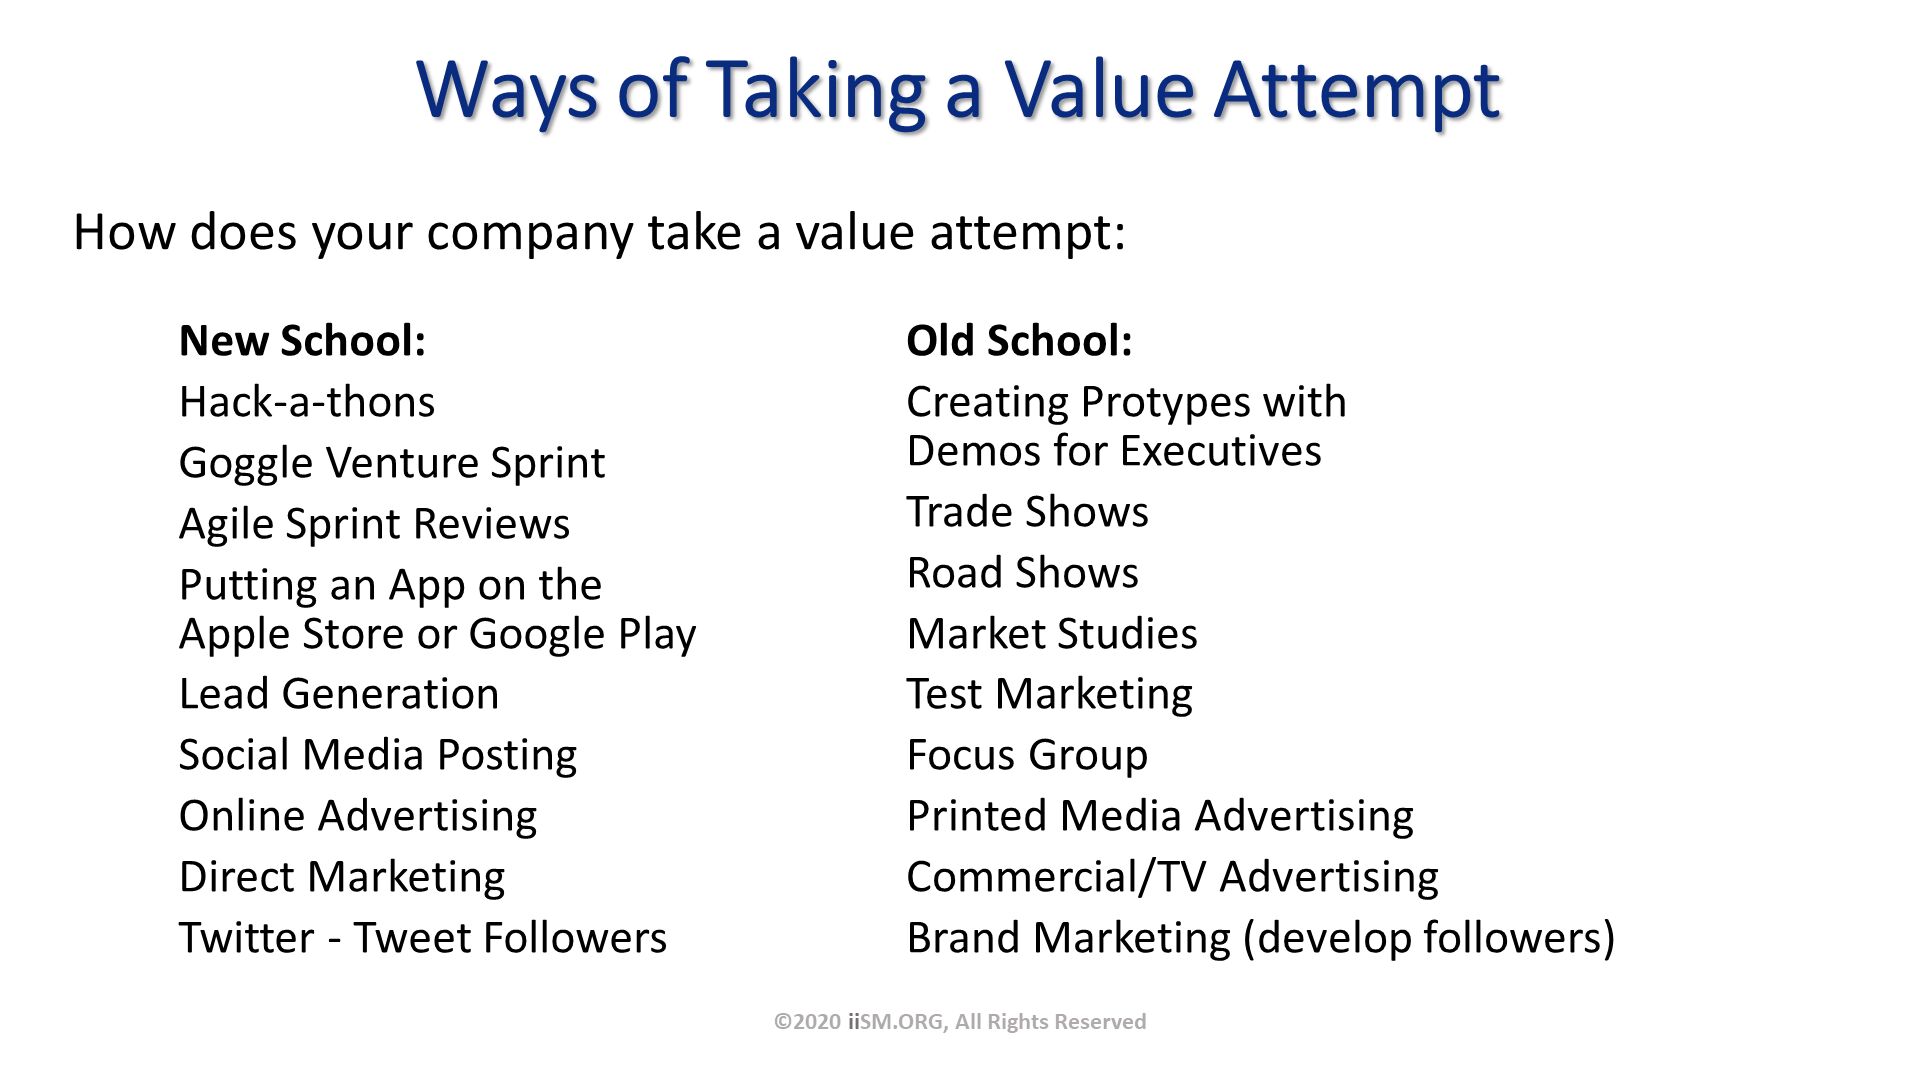 Ways of Taking a Value Attempt. New School:
Hack-a-thons
Goggle Venture Sprint
Agile Sprint Reviews
Putting an App on the Apple Store or Google Play
Lead Generation
Social Media Posting
Online Advertising
Direct Marketing 
Twitter - Tweet Followers

. ©2020 iiSM.ORG, All Rights Reserved. How does your company take a value attempt:. Old School:
Creating Protypes with Demos for Executives
Trade Shows
Road Shows
Market Studies
Test Marketing
Focus Group
Printed Media Advertising
Commercial/TV Advertising
Brand Marketing (develop followers)
. 